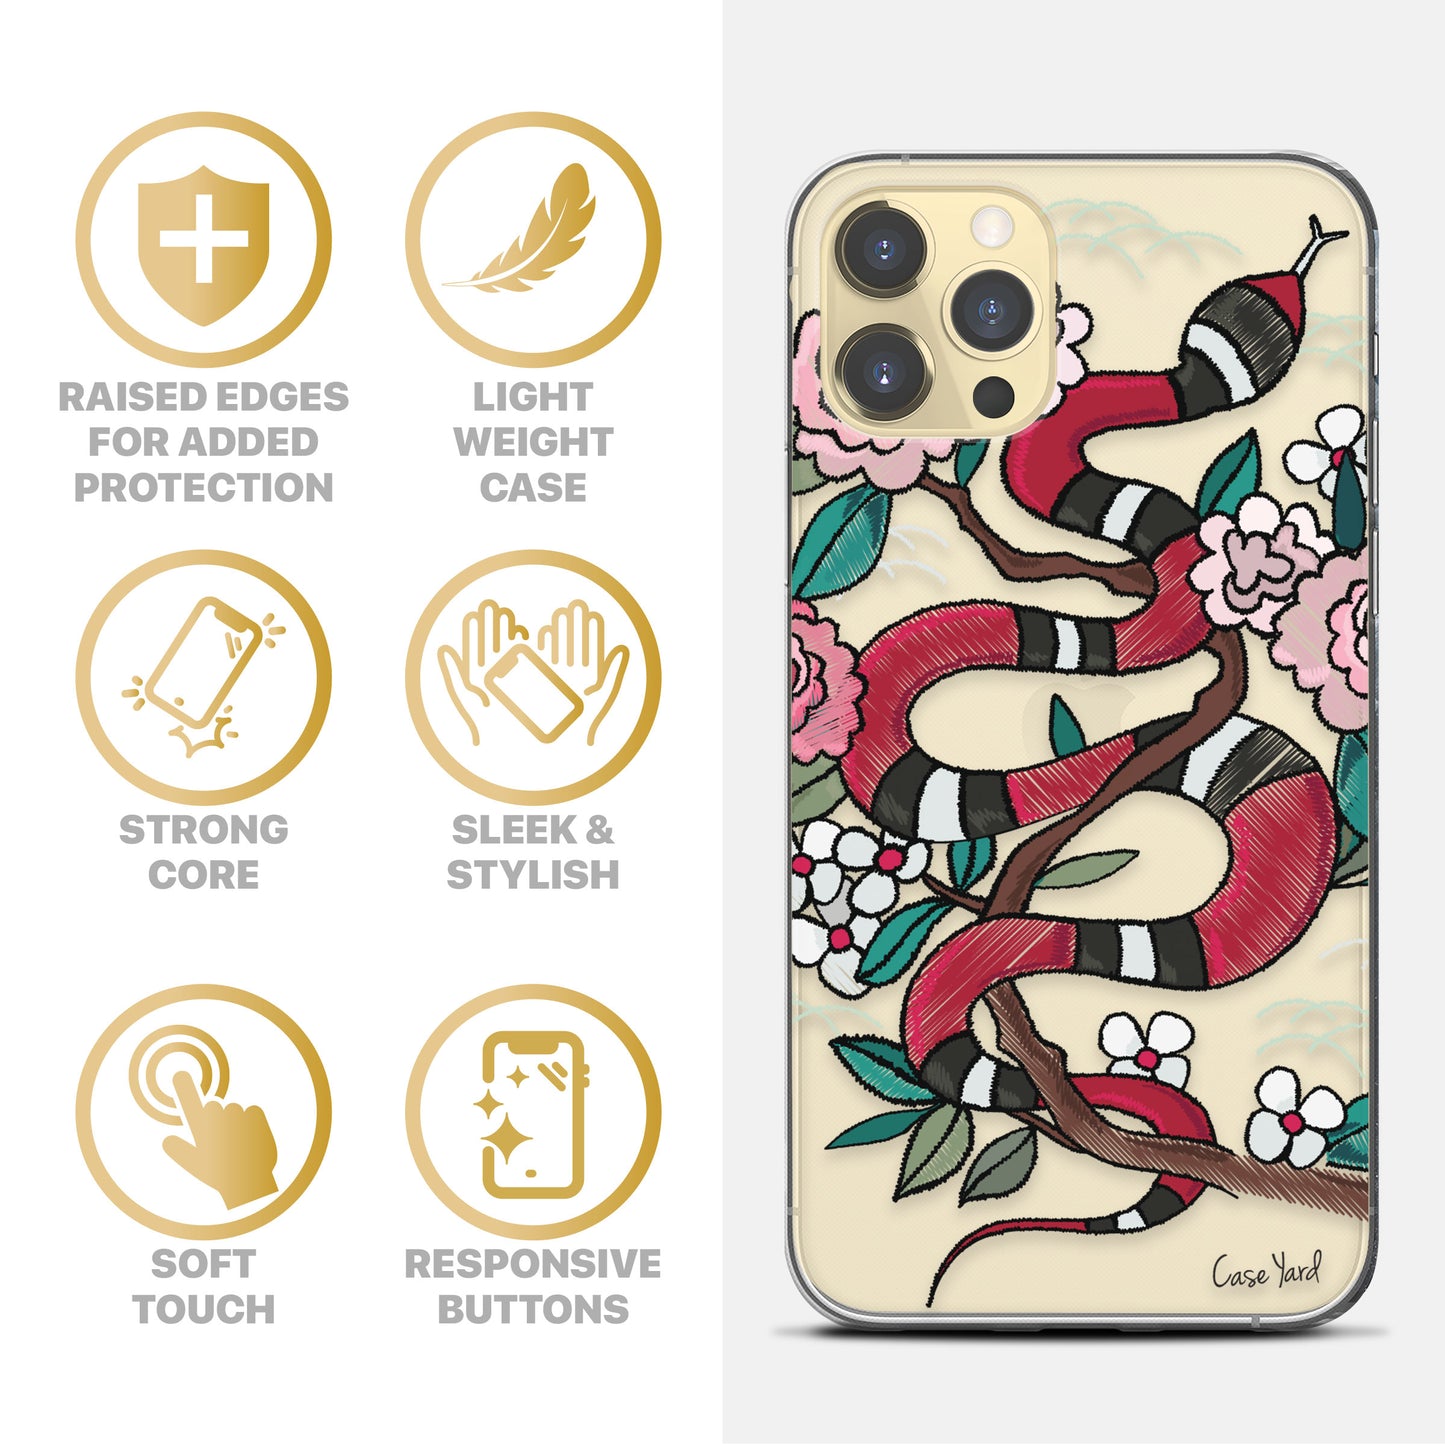 TPU Case Clear case with (Flower Snake) Design for iPhone & Samsung Phones